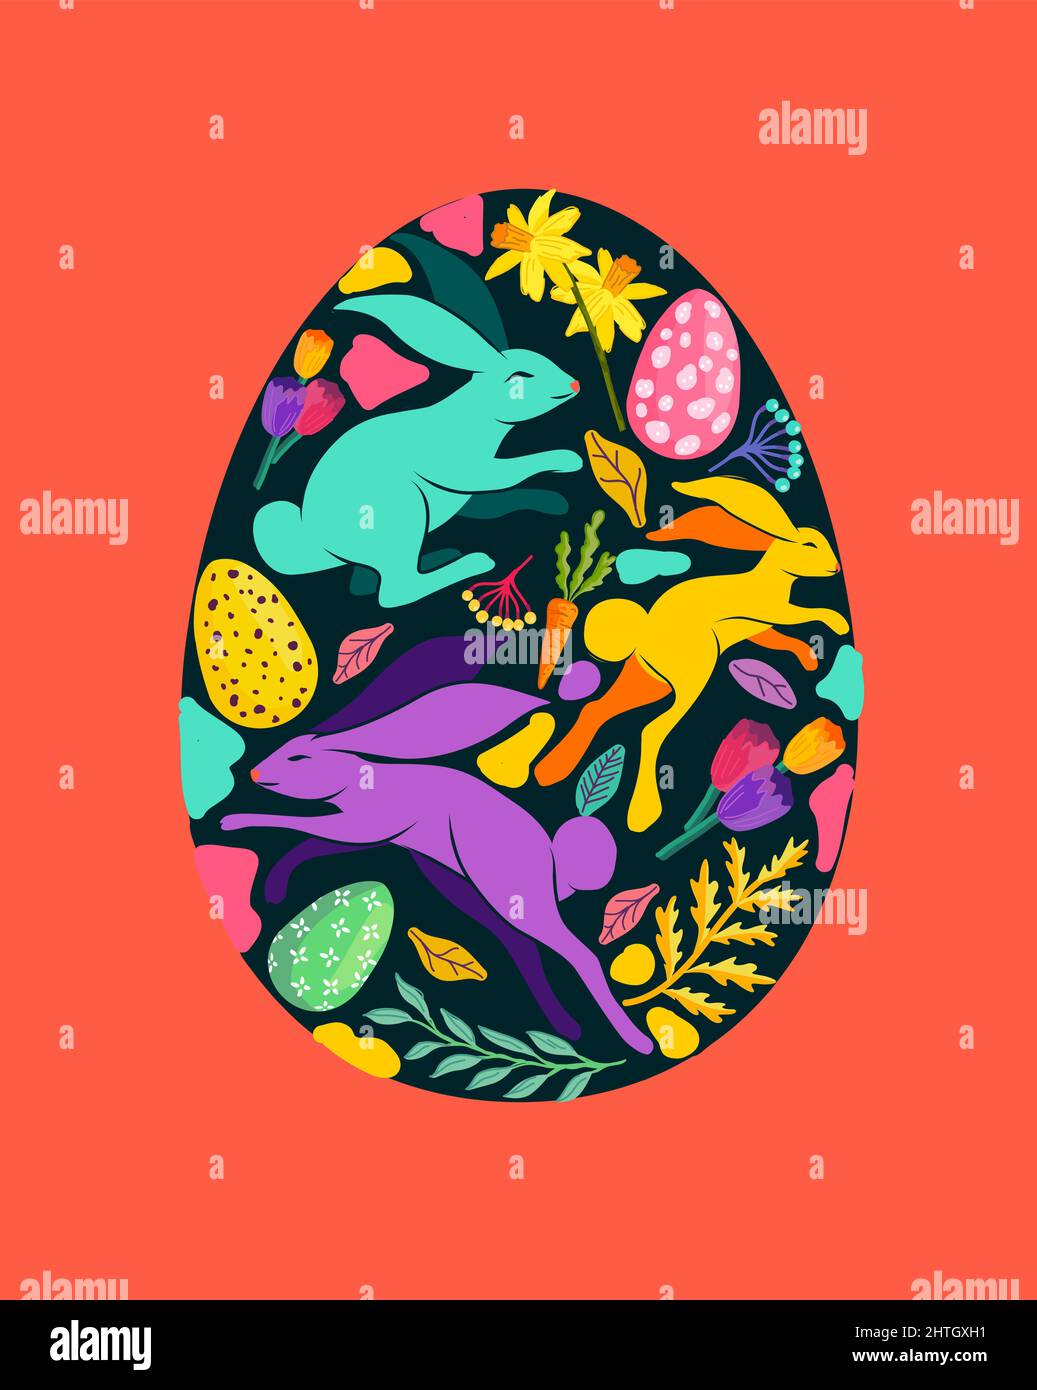 Colorful and bright easter egg shape decorated with floral flowers and plants, rabbits and easter eggs. Vector illustration. Stock Vector